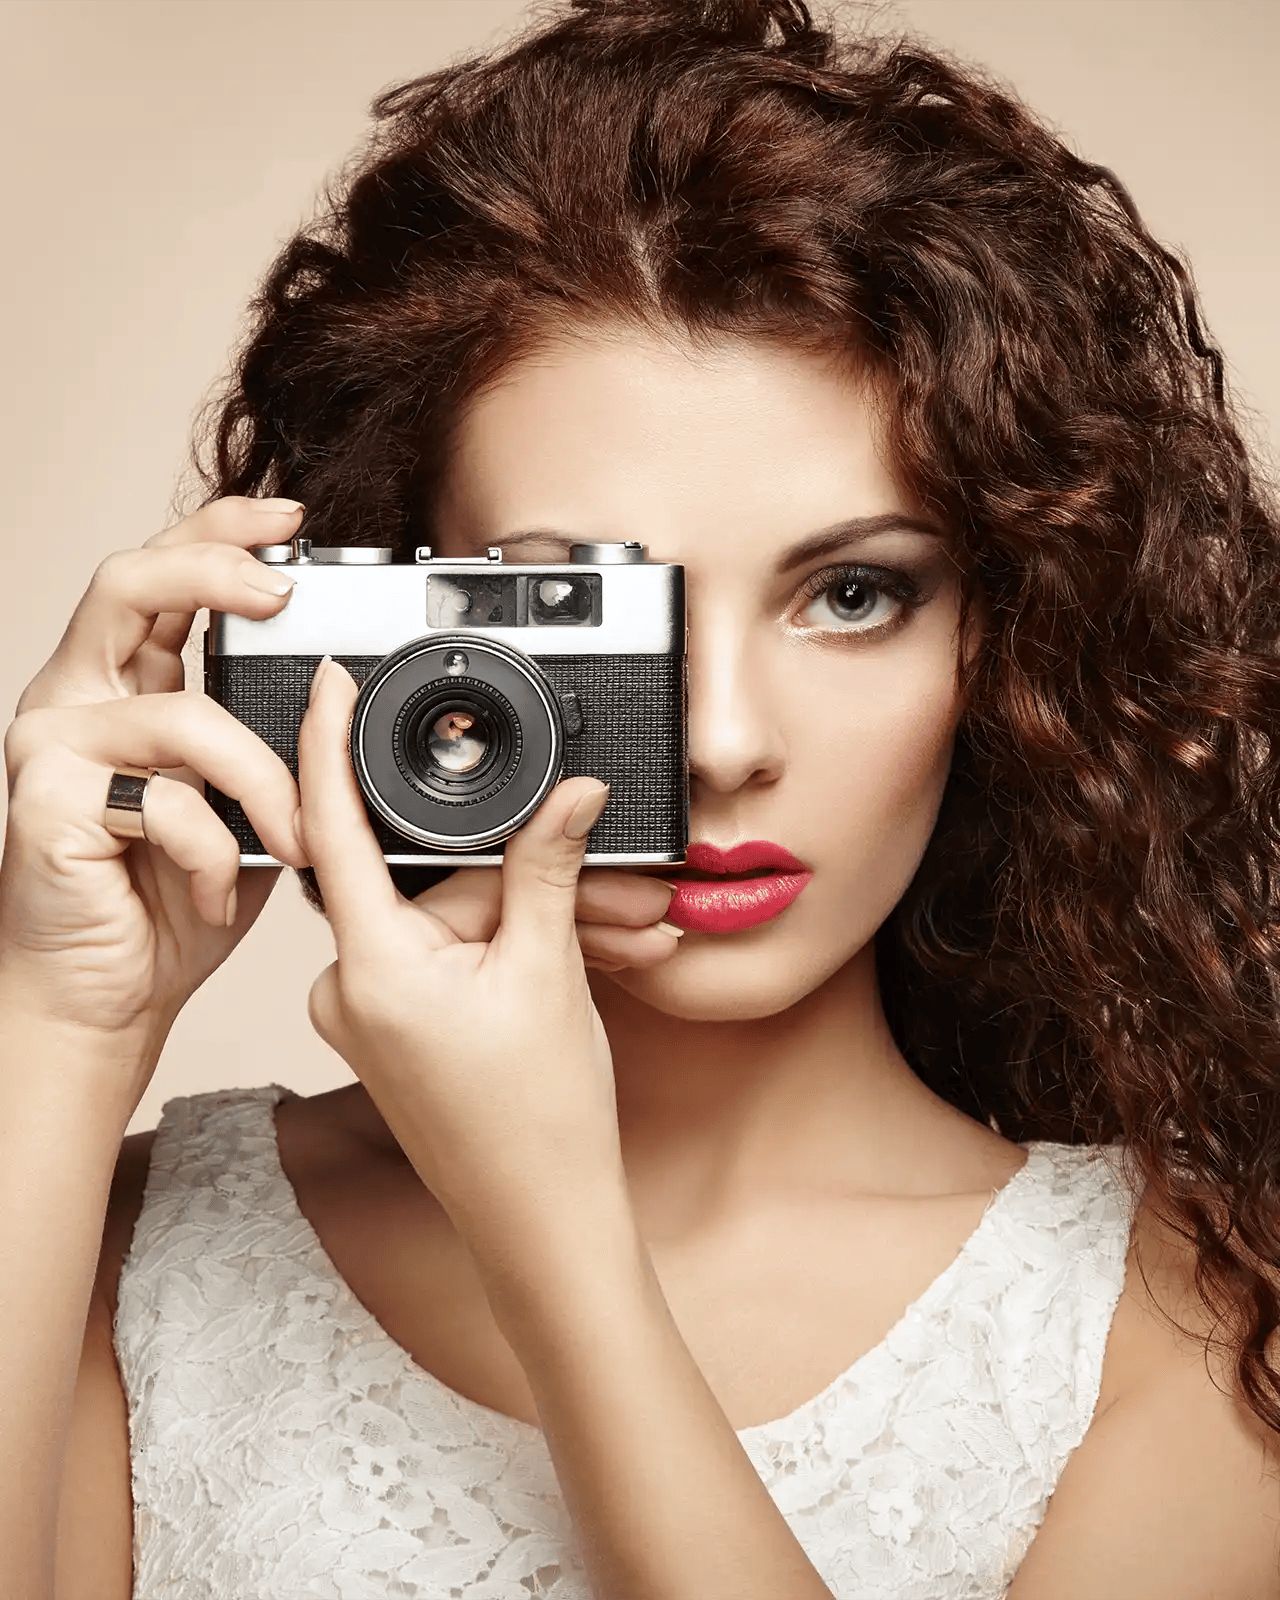 a lady with brown frizzy hair holding a vintage film camera taking a photo